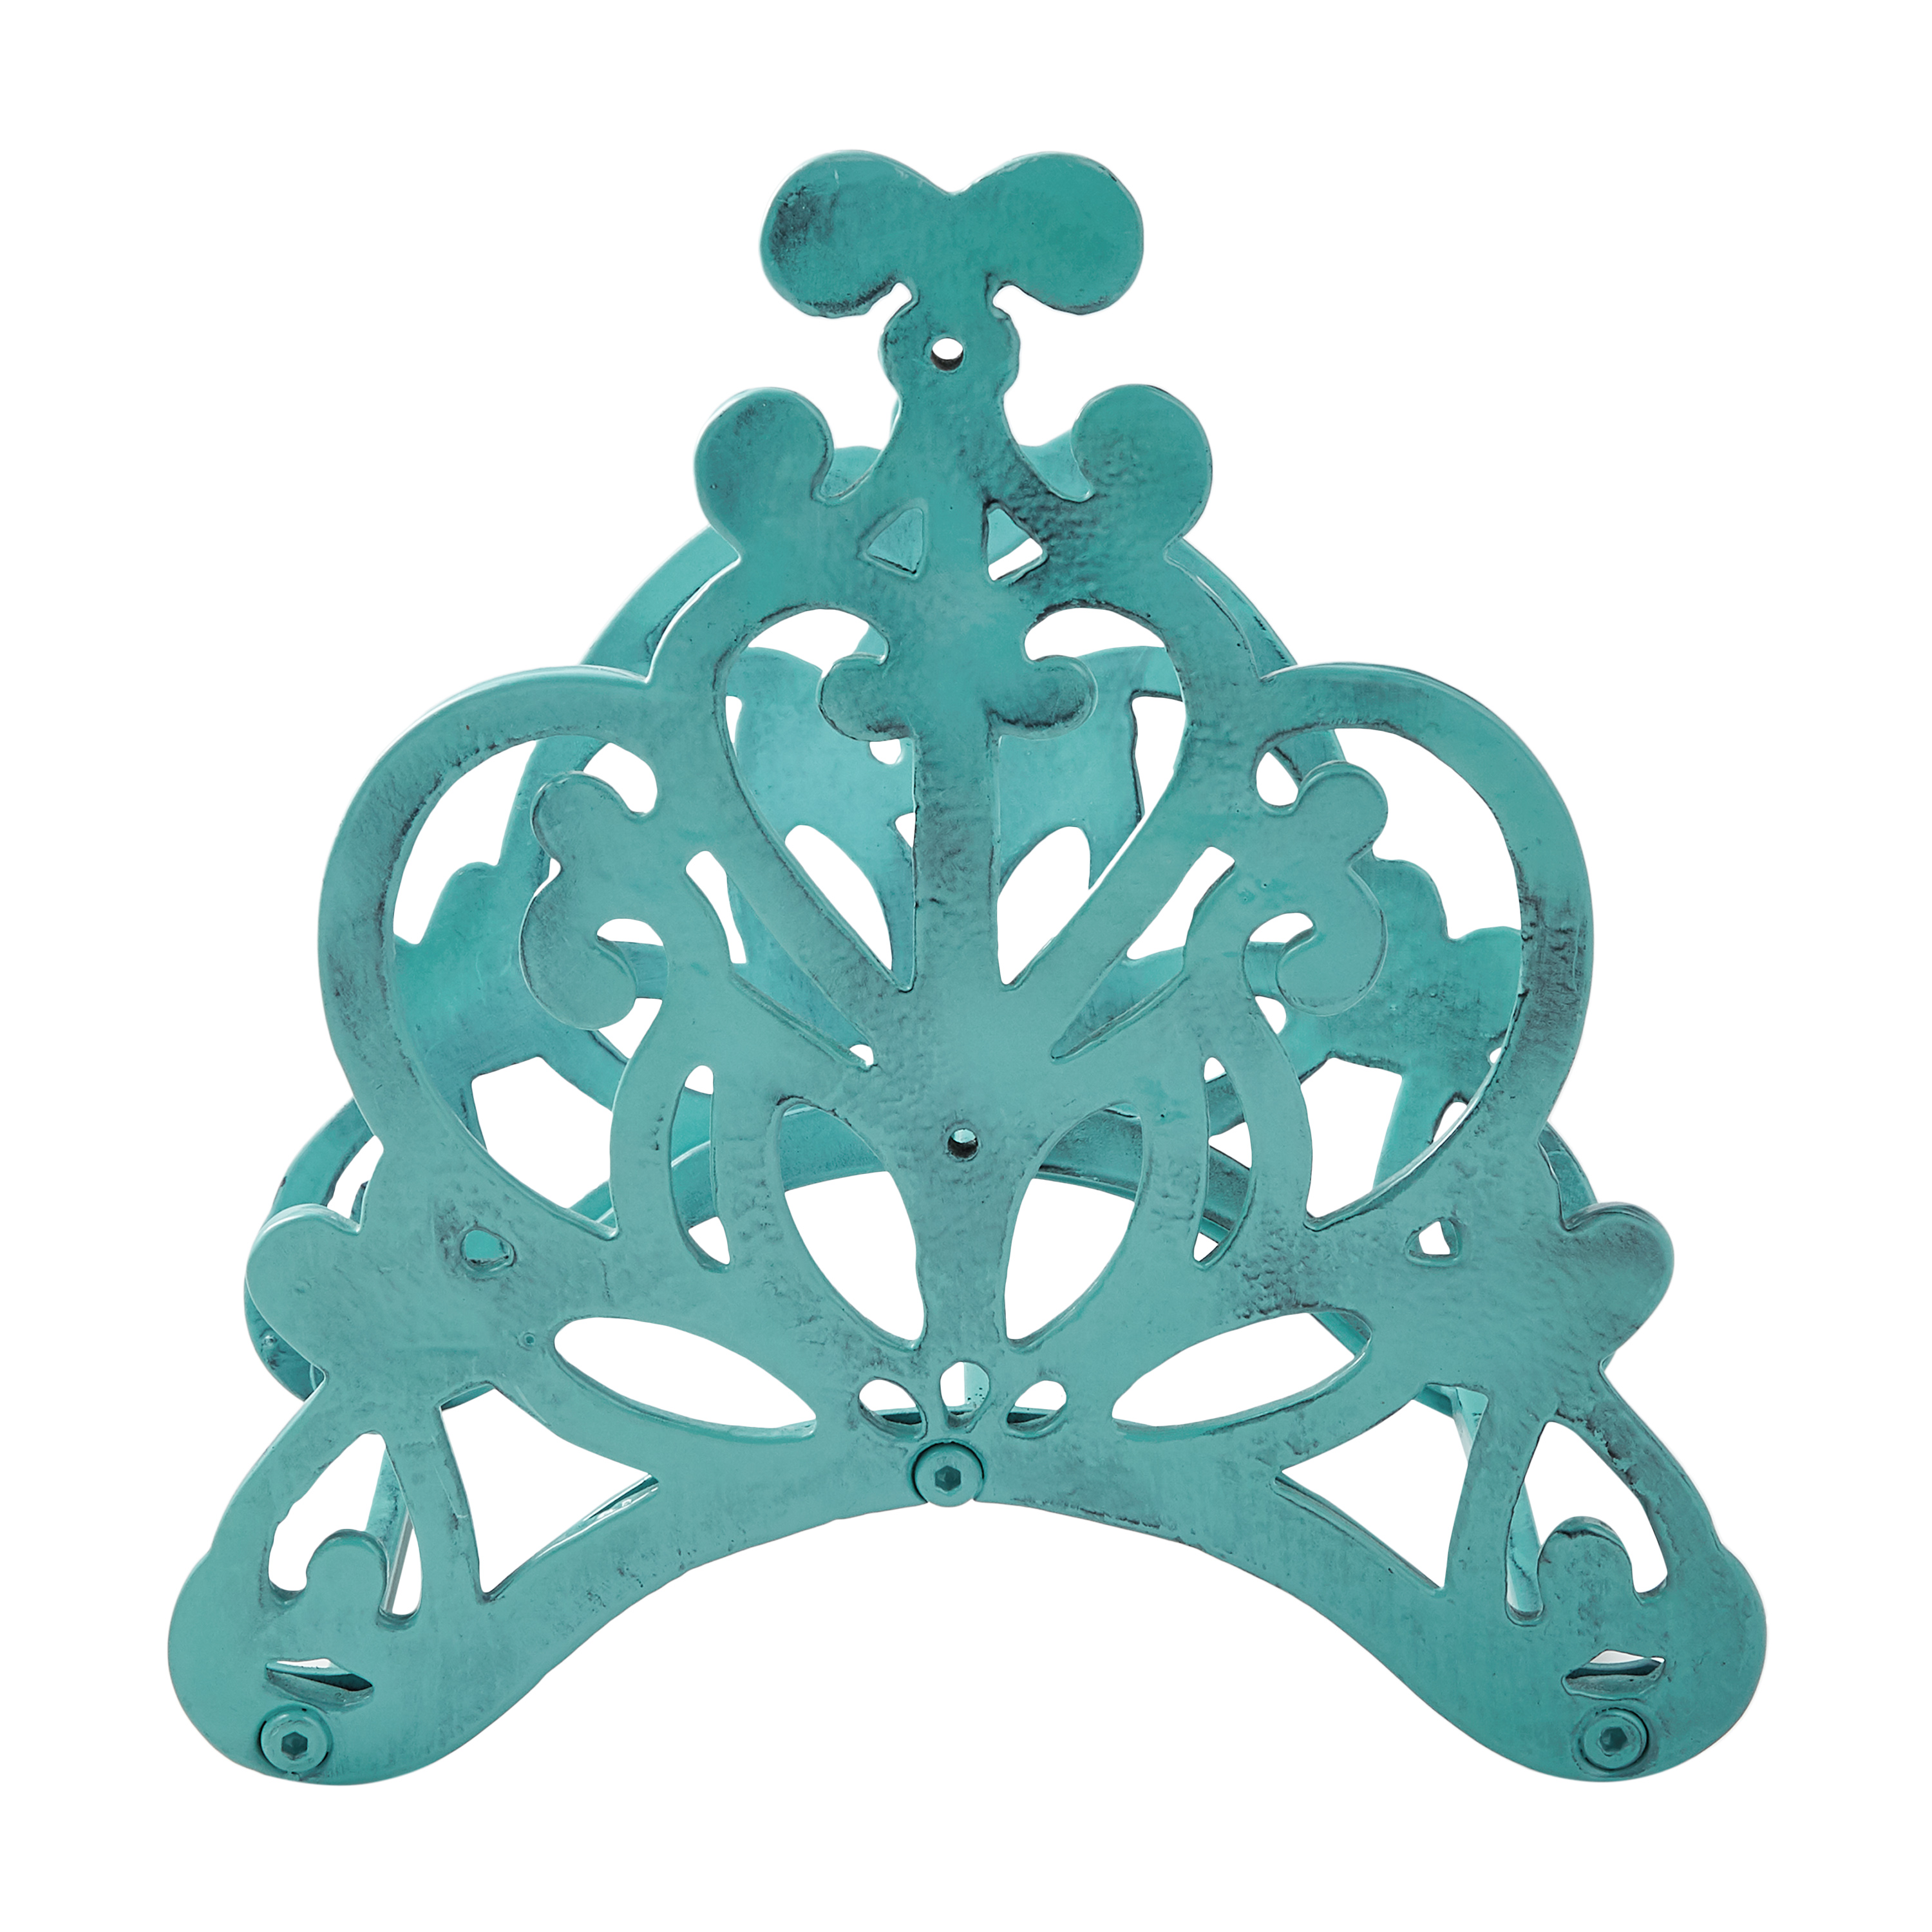 The Pioneer Woman Goldie Decorative Hose Hanger, Teal - image 5 of 7